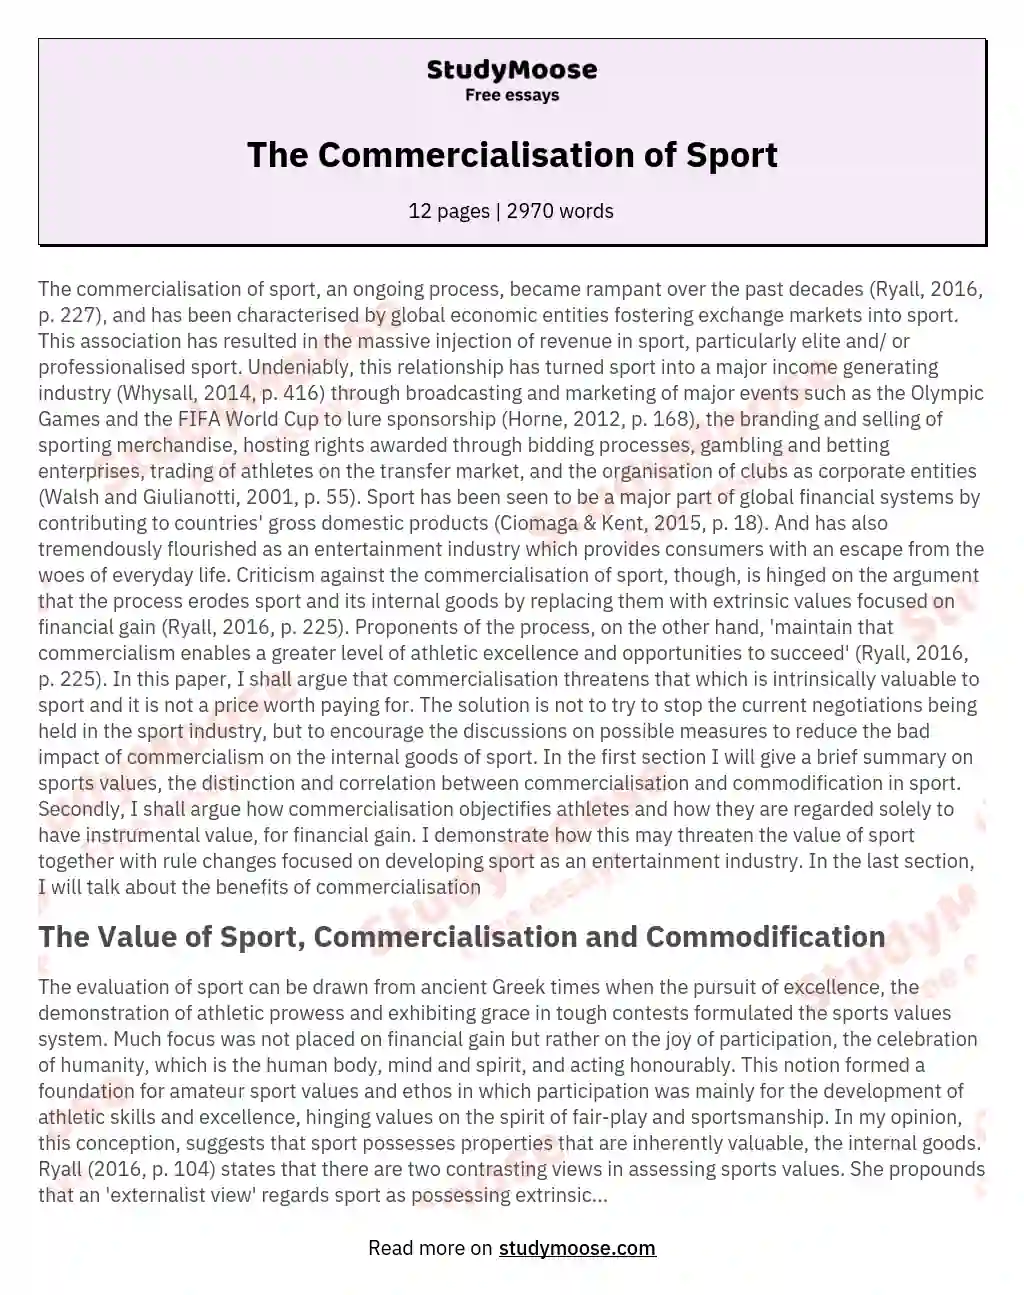 The Commercialisation of Sport essay